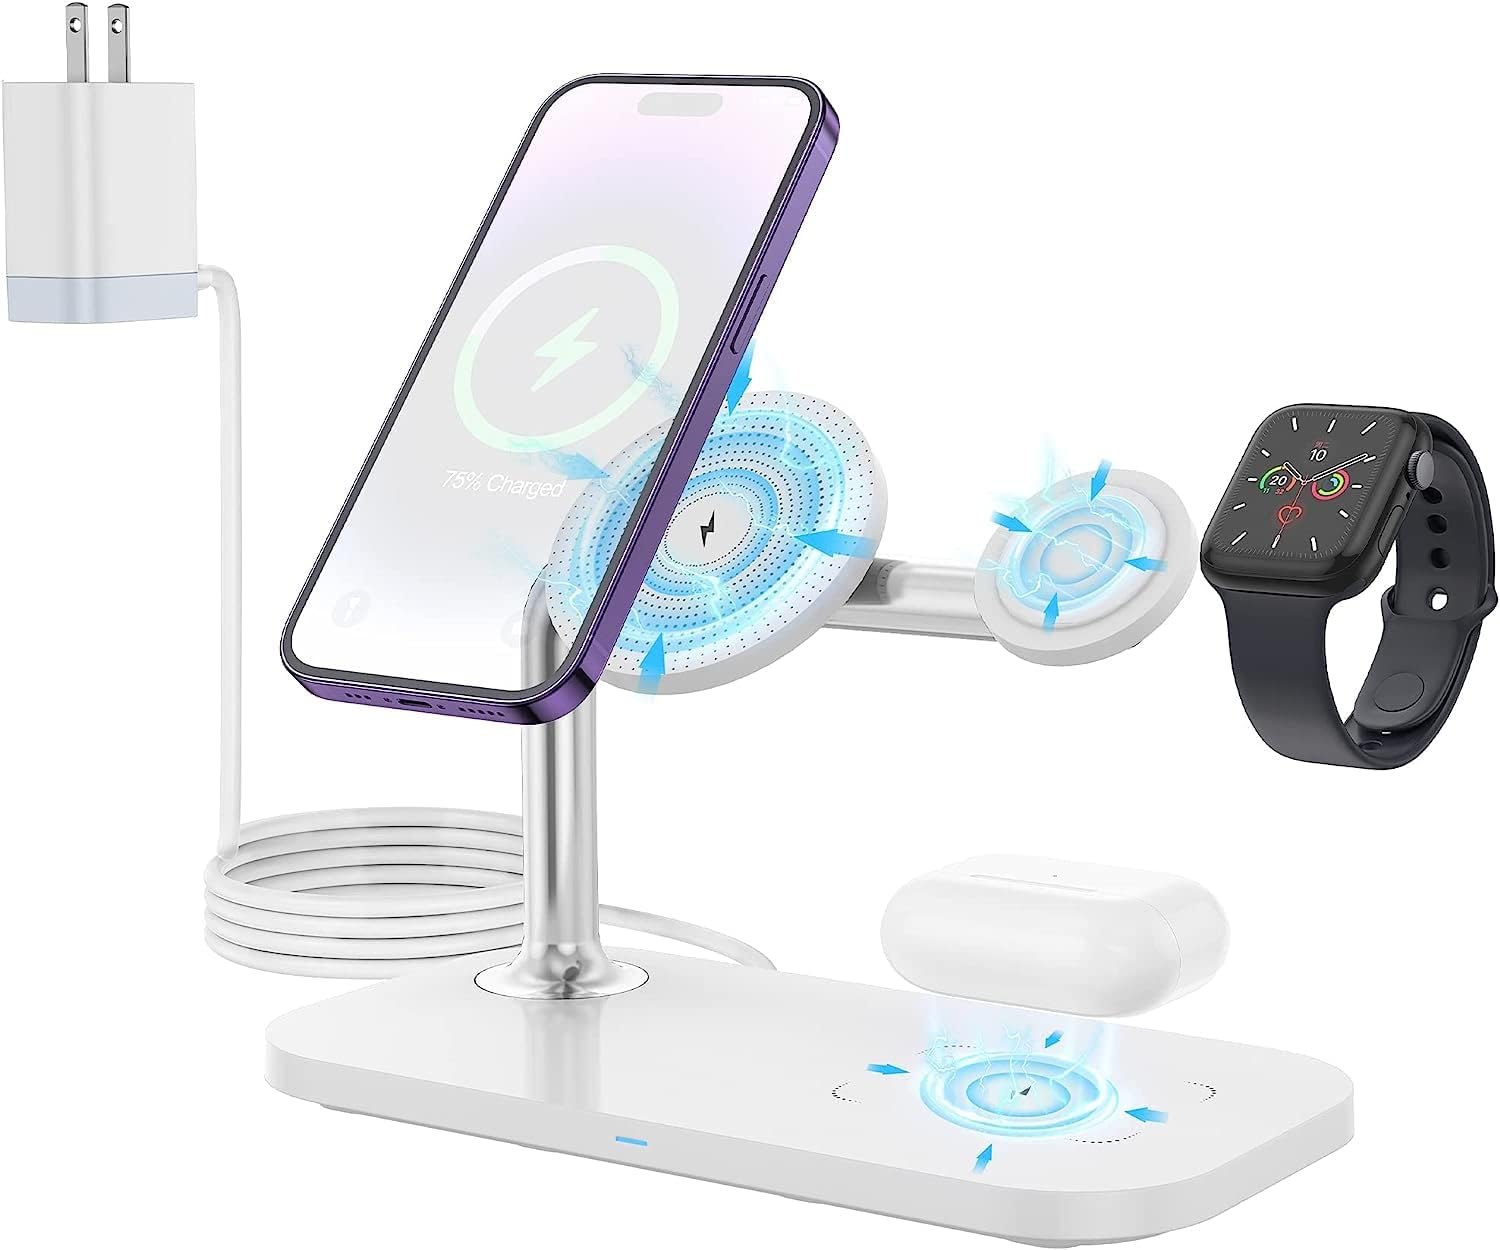 Wireless Charging Station 3 in 1 Fast Magnetic Charger [...]